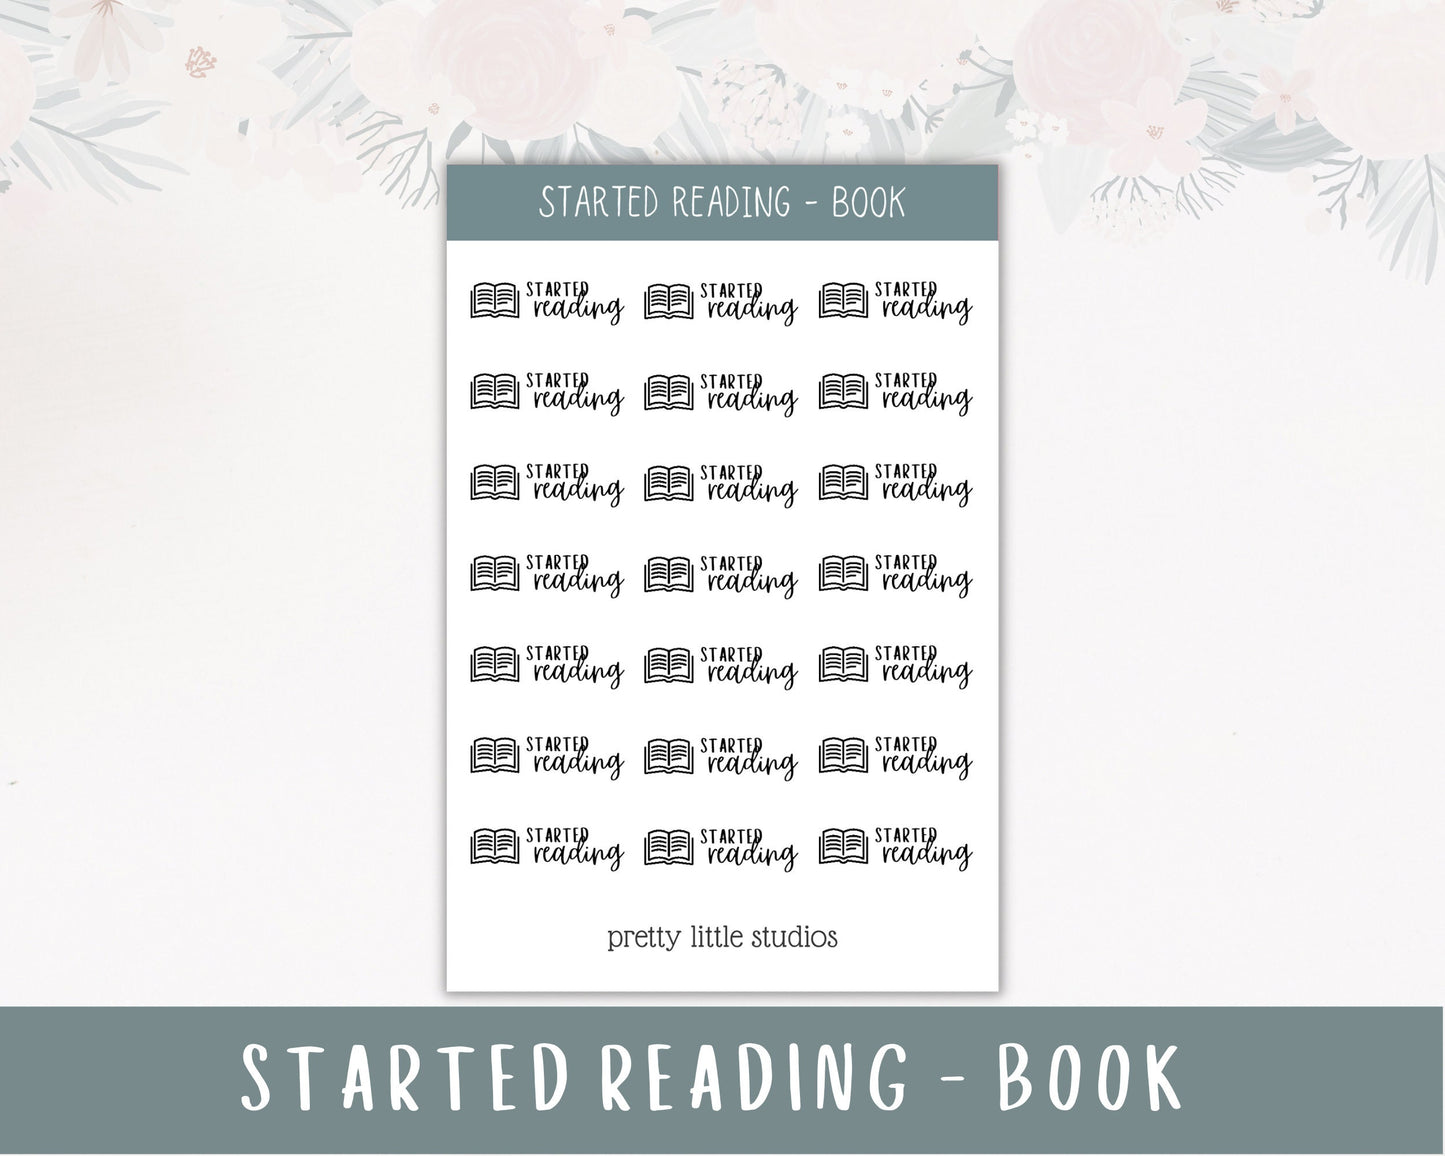 Started Reading Icon Sticker Sheet - Reading Journal Stickers - Audiobook Stickers -Ebook Stickers - Book Tracking Stickers